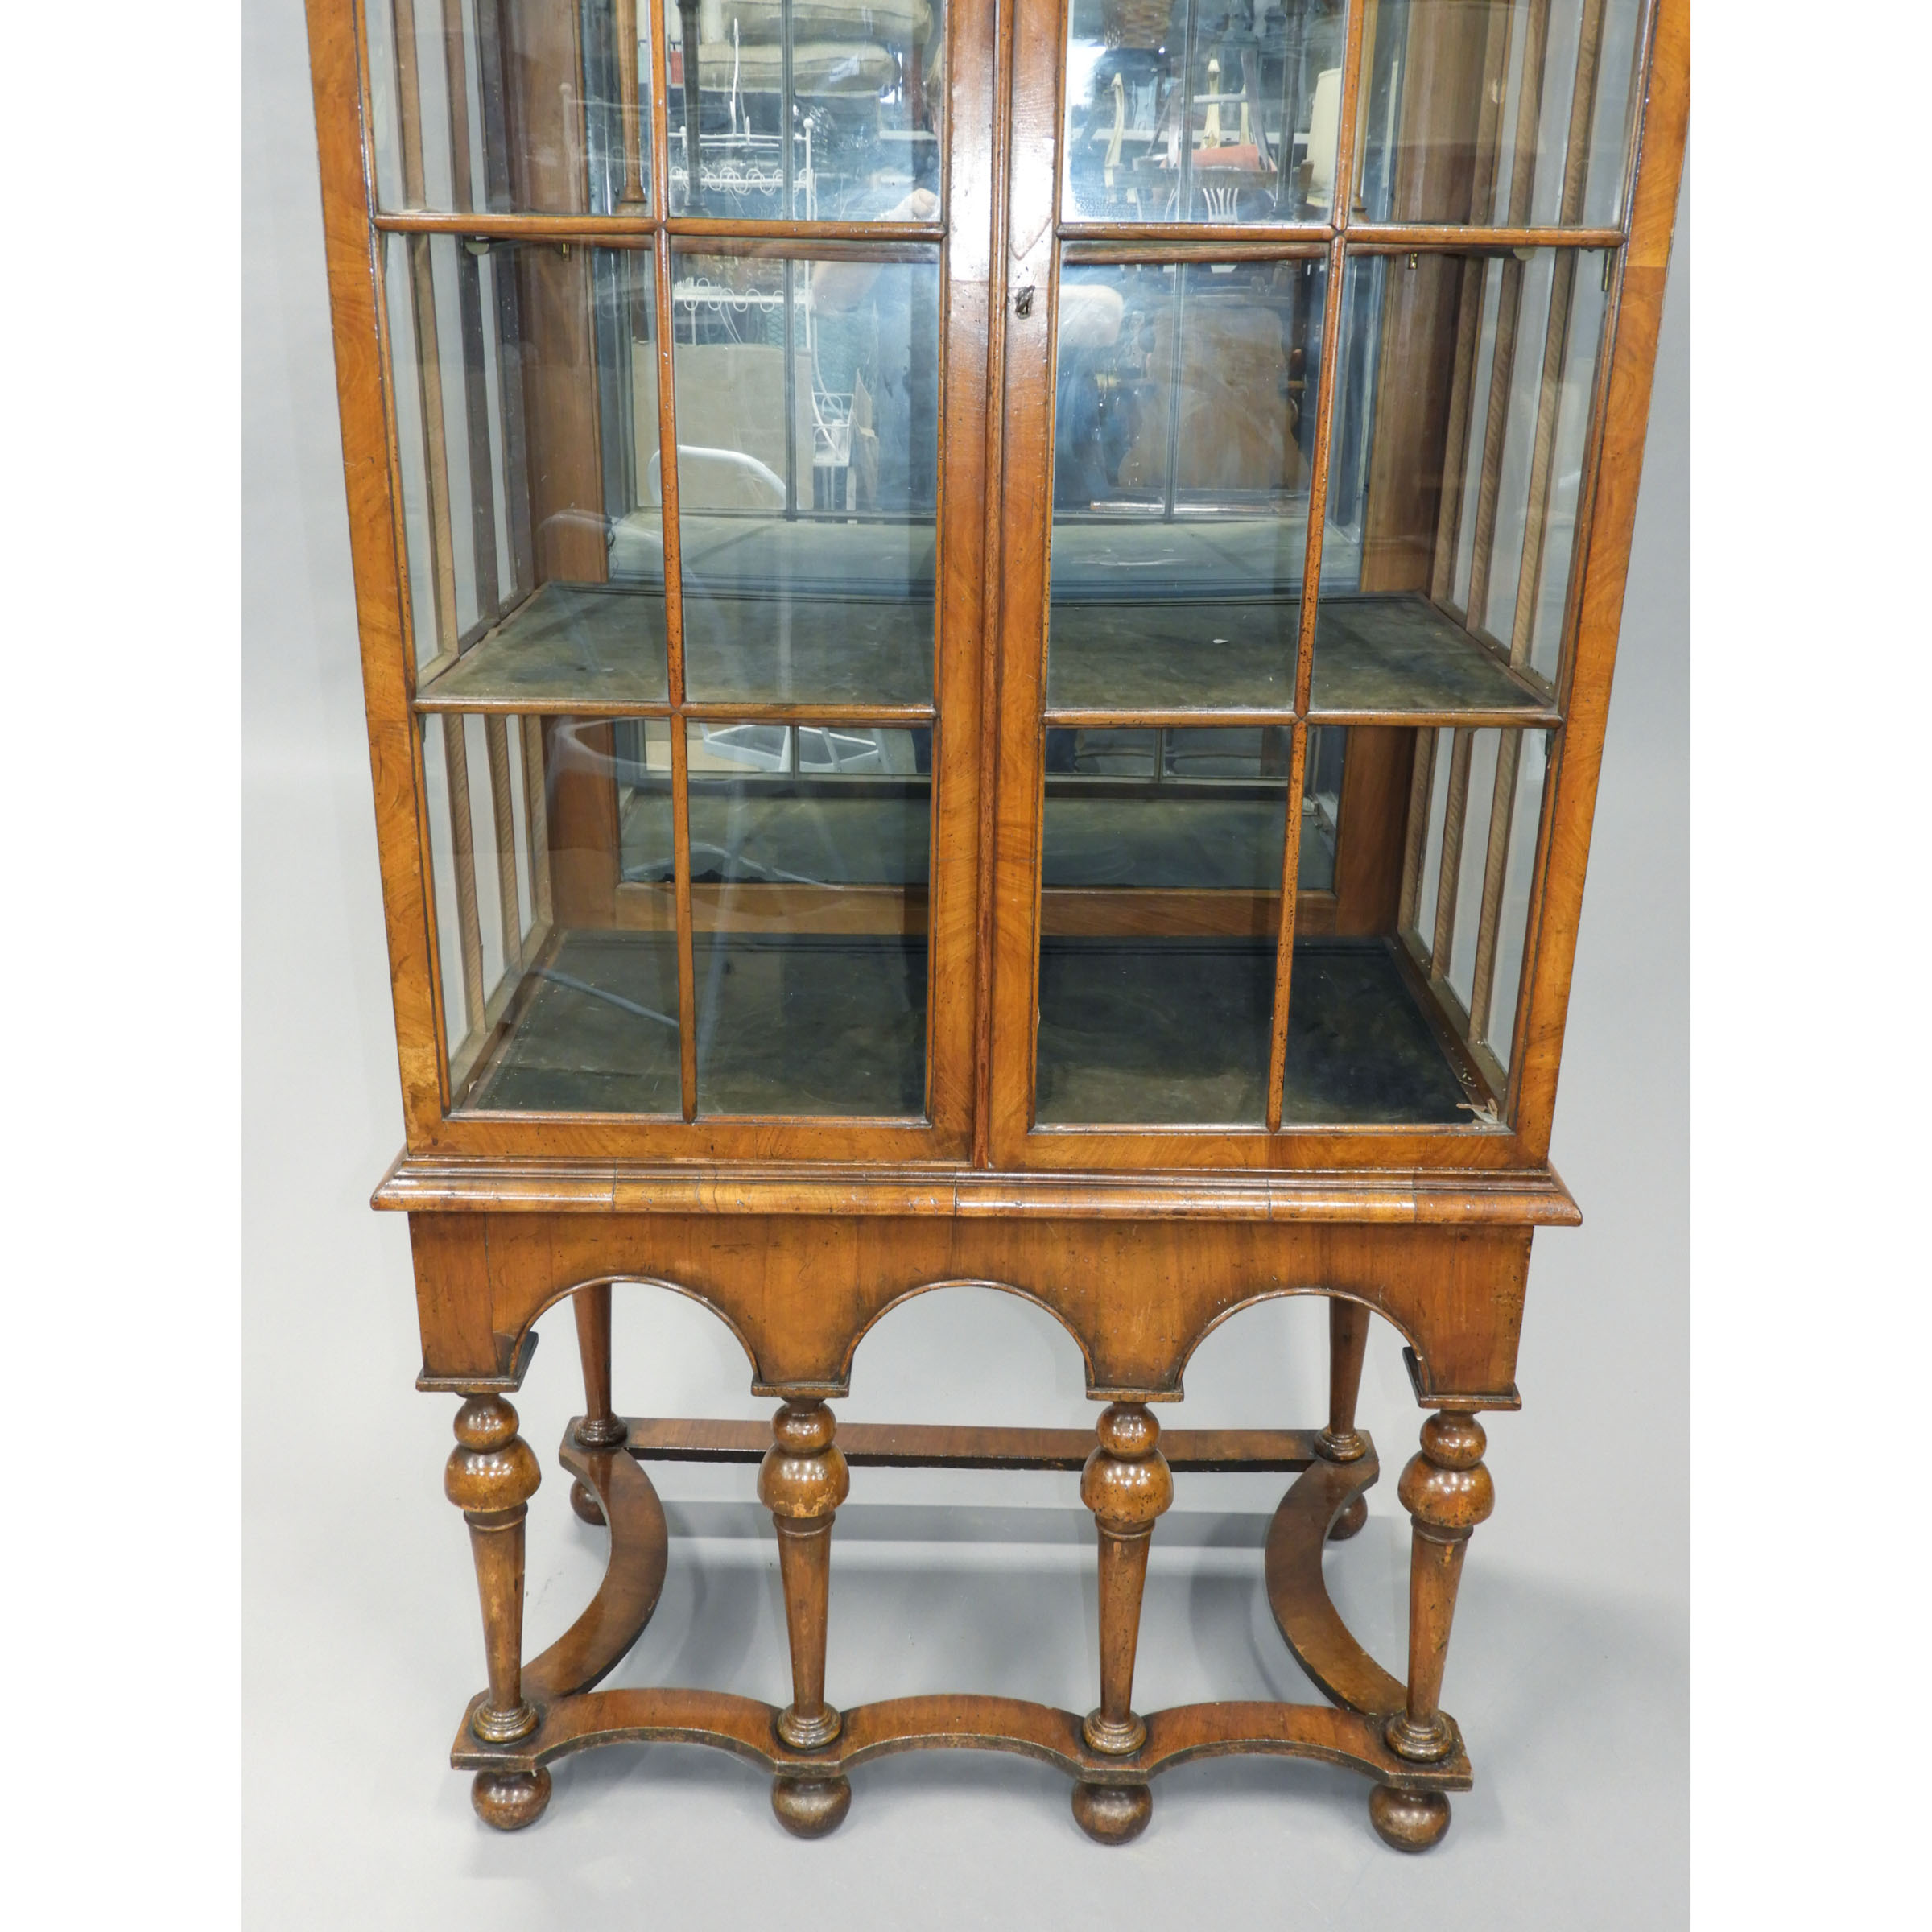 William and Mary Style Glazed Walnut Vitrine Cabinet on Stand, early 18th century and later